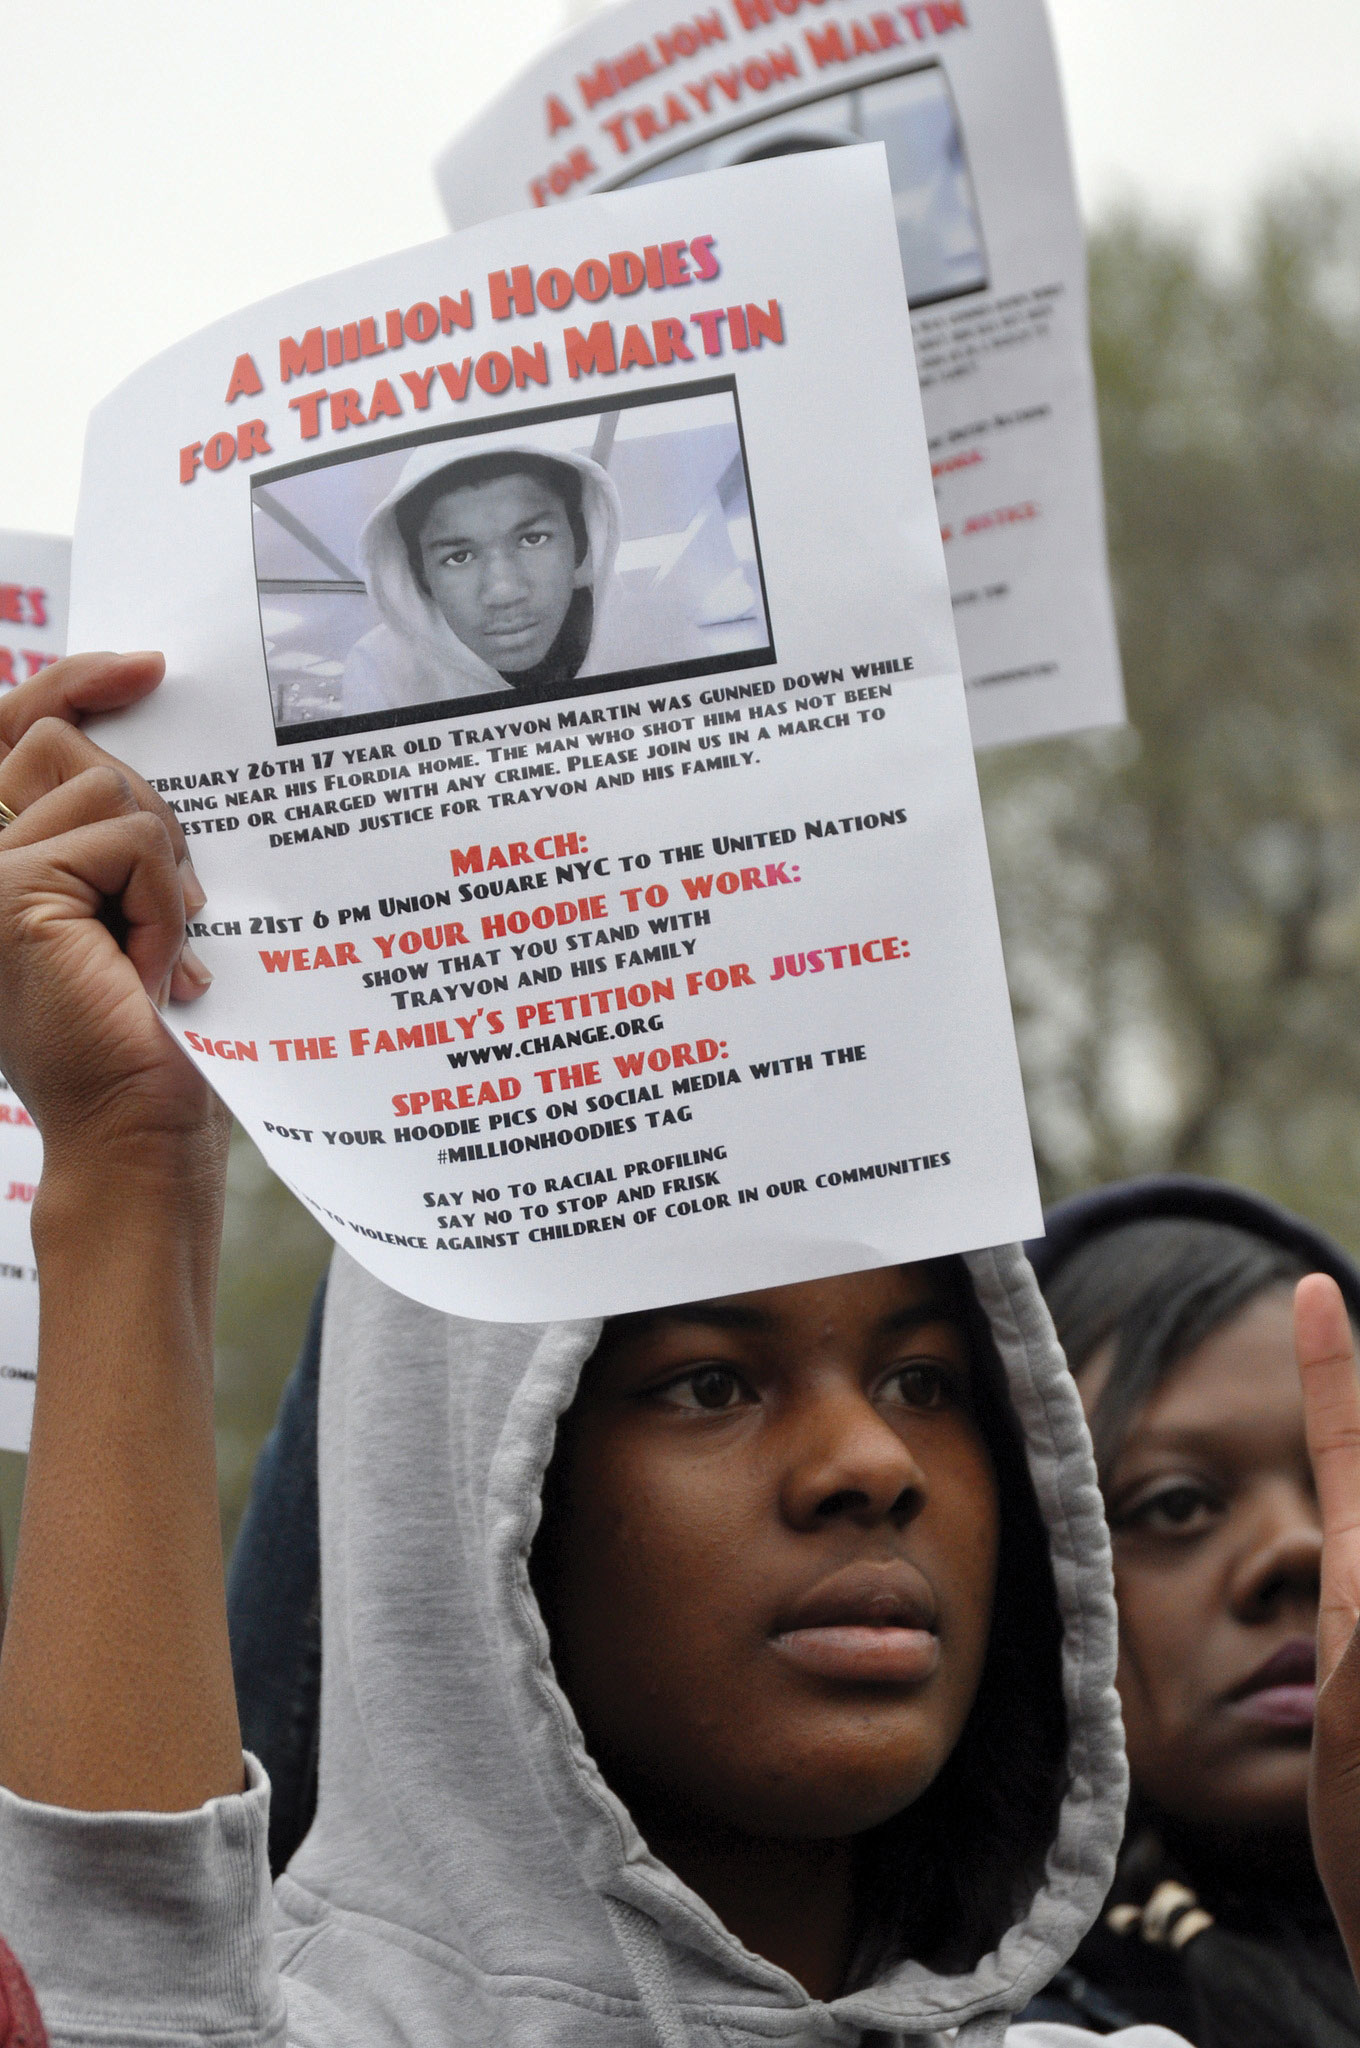 Protest in the aftermath of Trayvon Martin's murder.